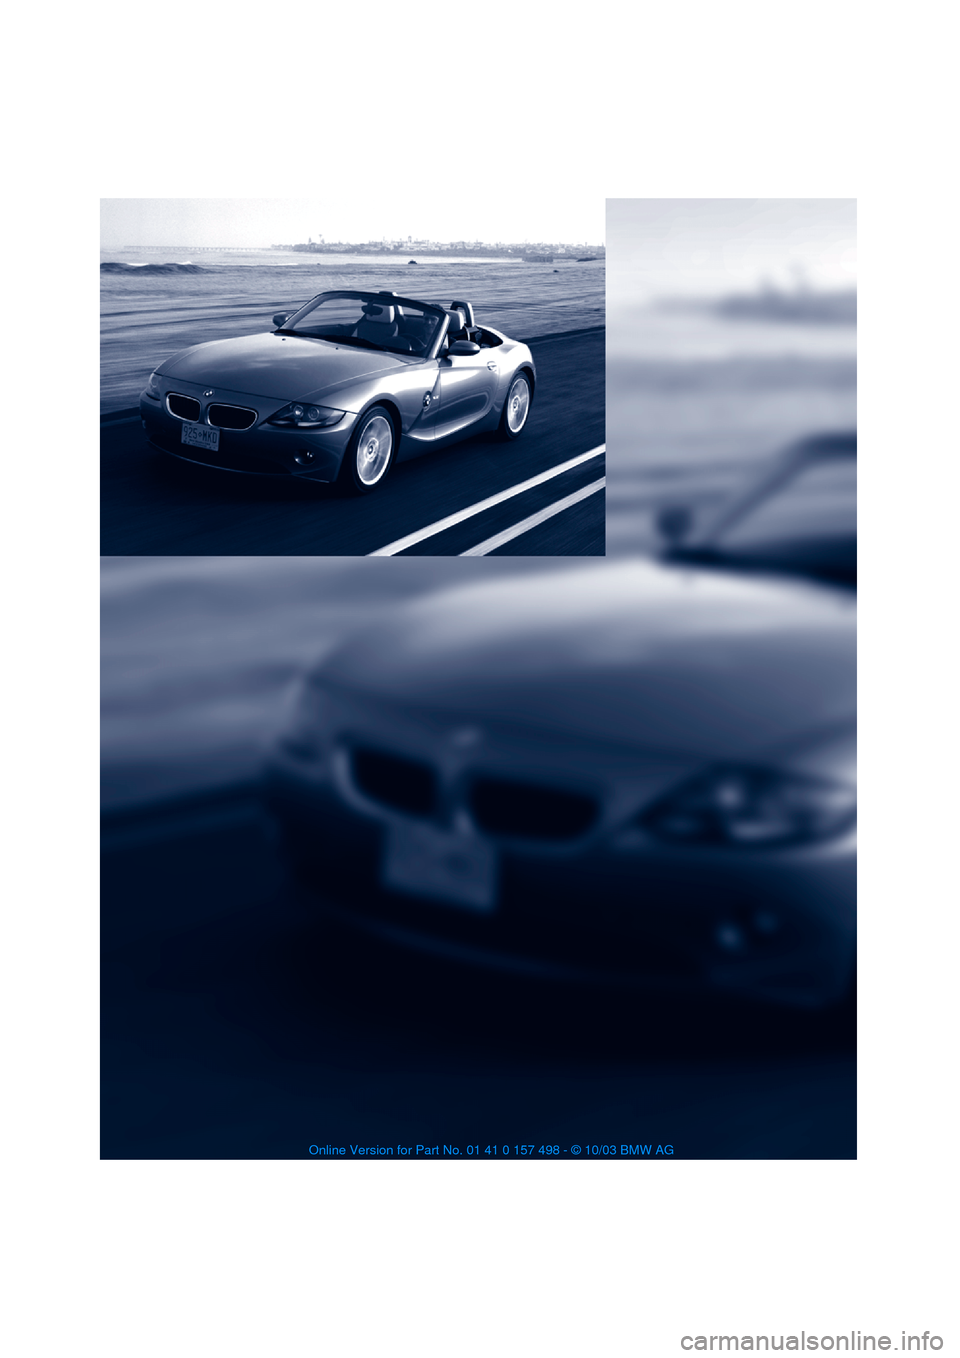 BMW Z4 ROADSTER 2.5I 2004 E85 Owners Manual 